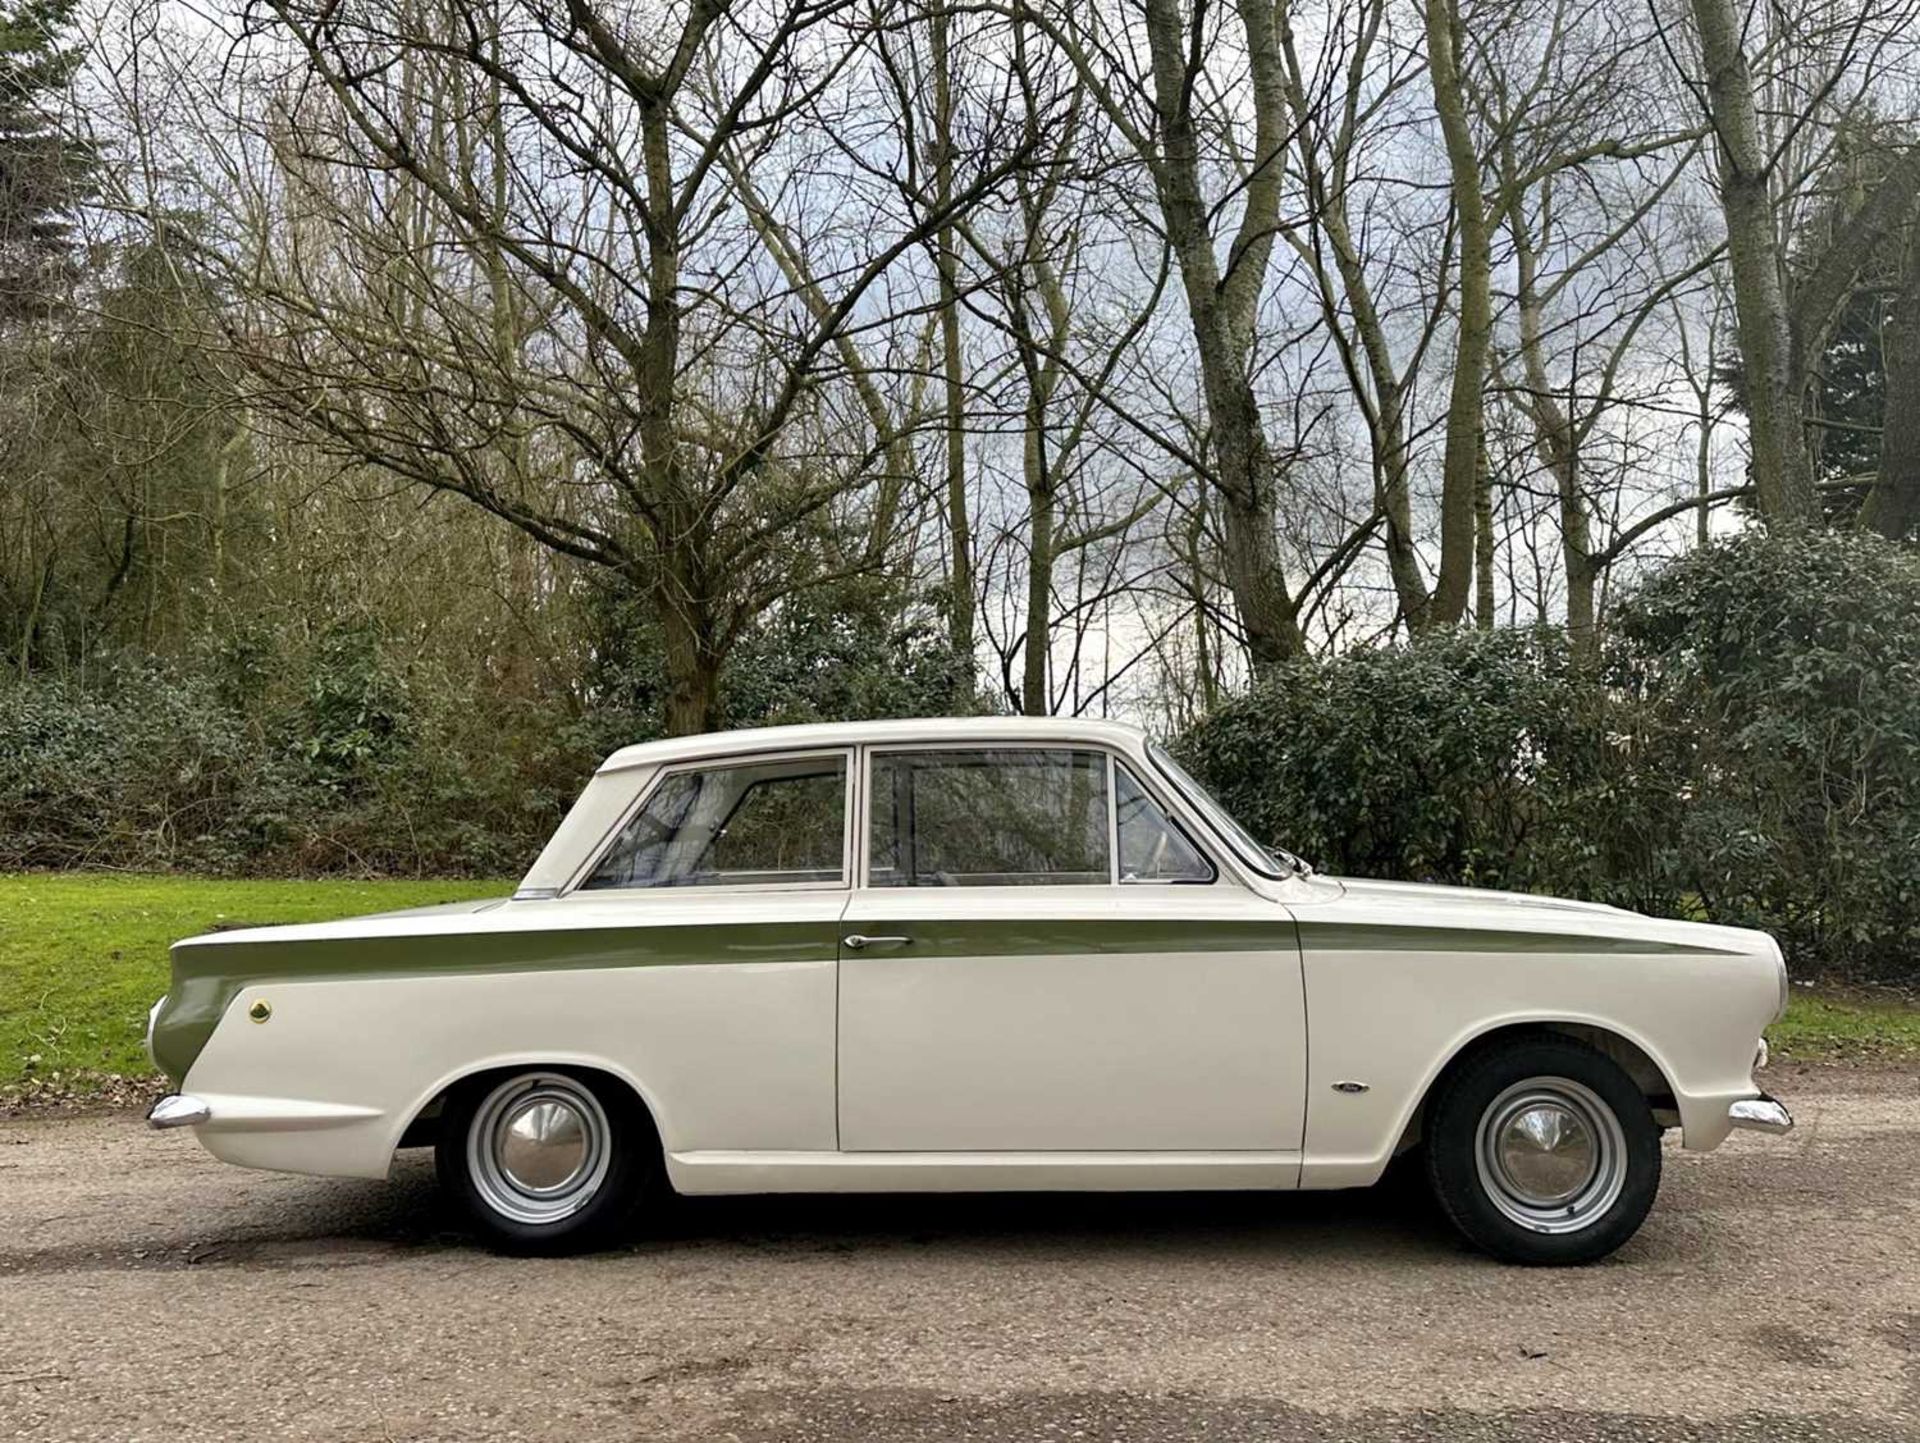 1963 Ford Lotus Cortina Pre-Aeroflow model, fitted with A-frame rear suspension - Image 9 of 58